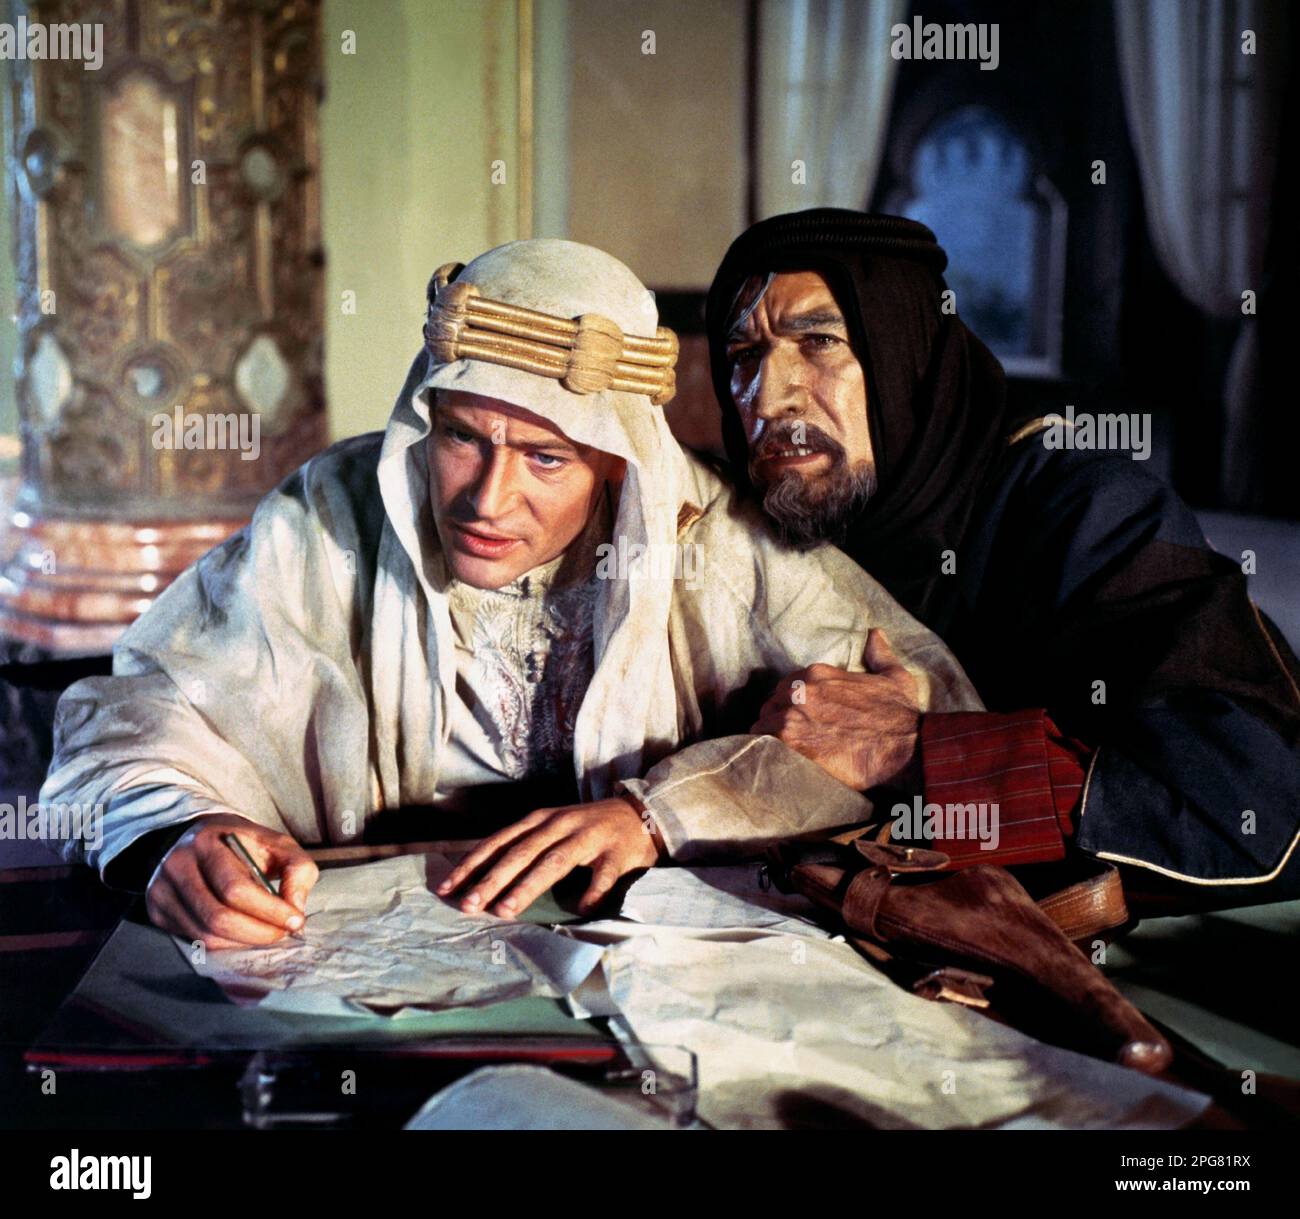 Lawrence von Arabien Peter O'Toole & Anthony Quinn Stockfoto